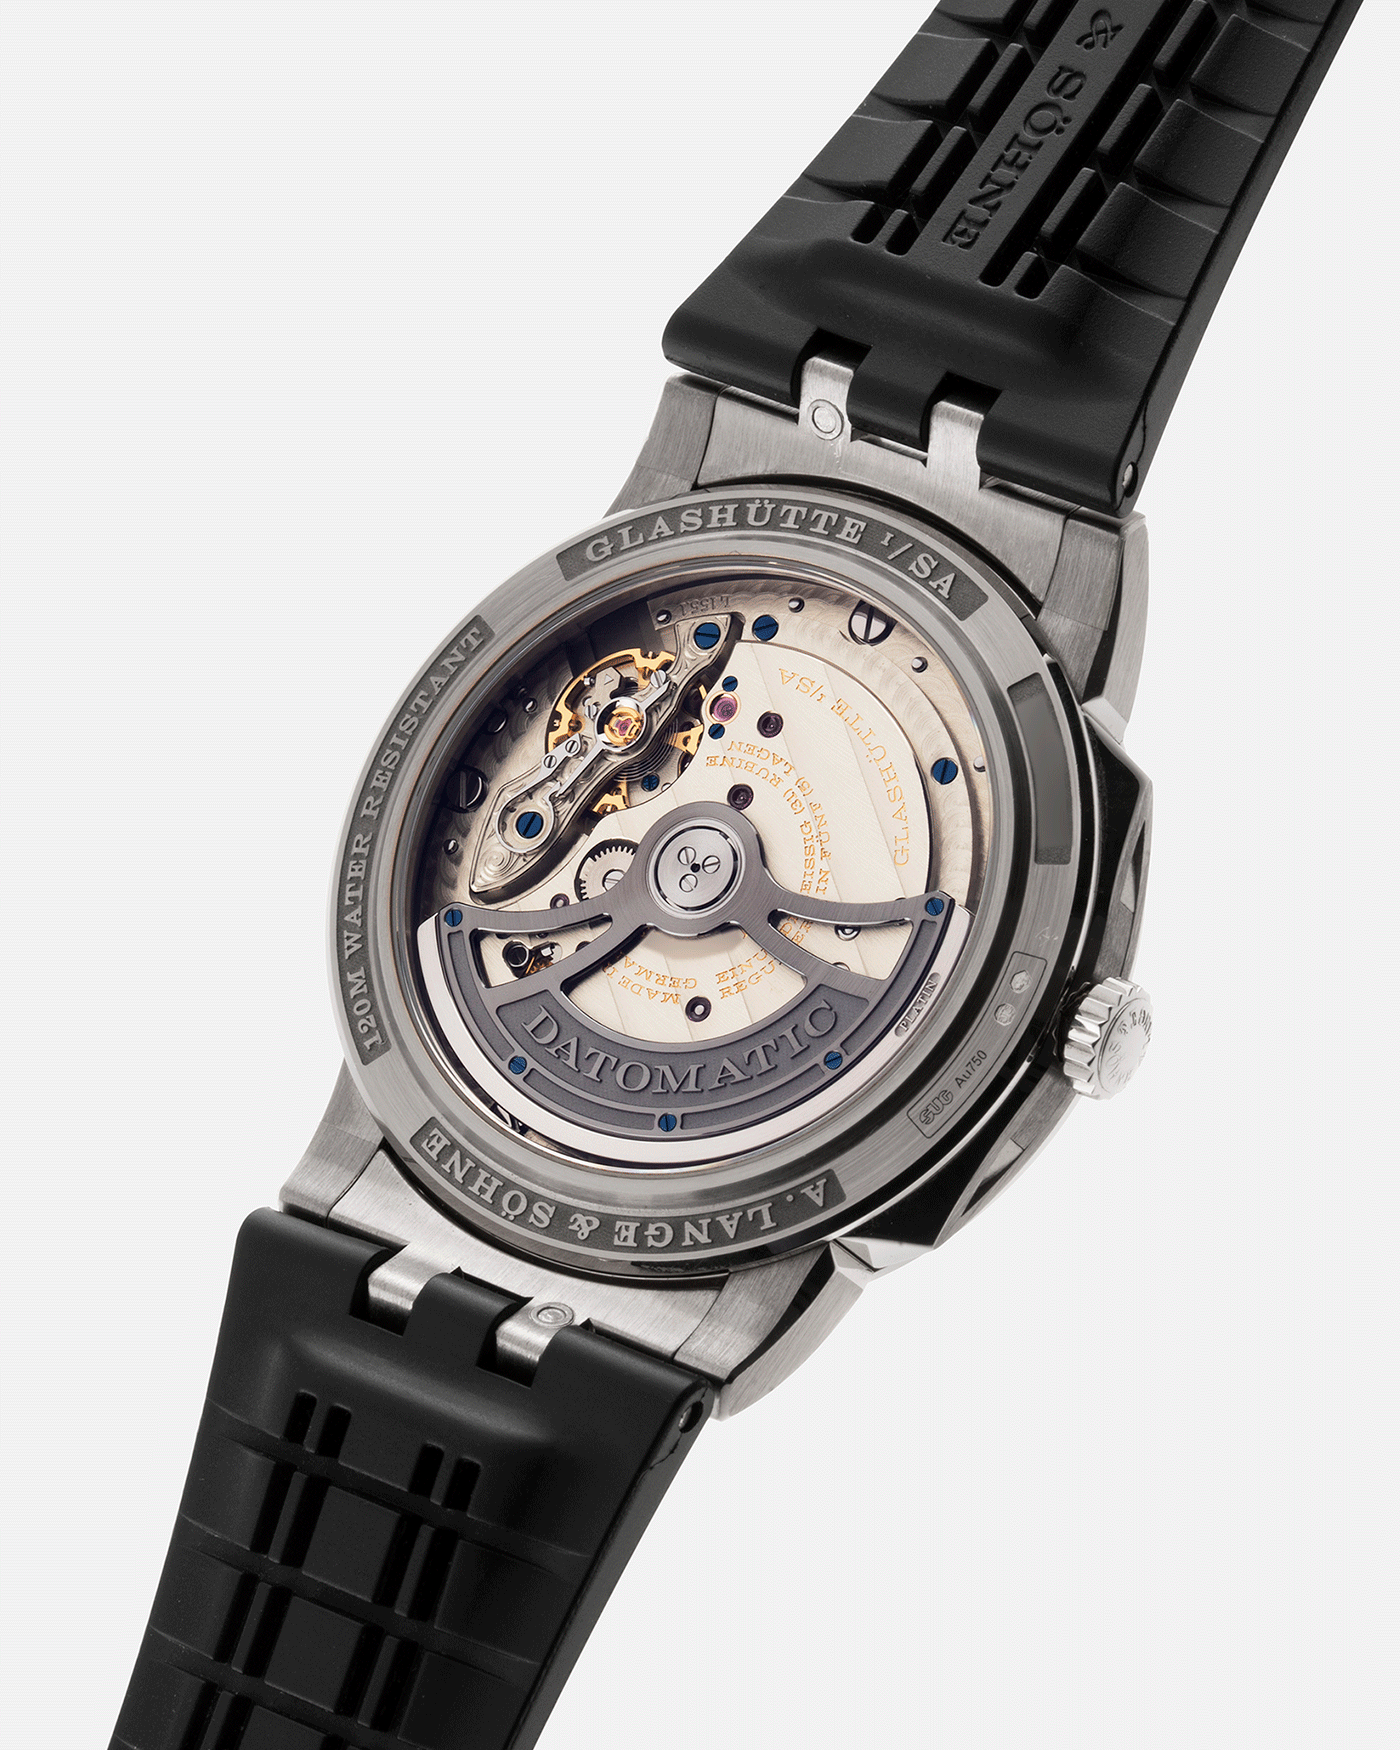 Brand: A. Lange & Sohne Year: 2021 Model: Datomatic Odysseus Ref Number: 363.038 Material: 18k White Gold Movement: Self-Winding In-House L155.1 Case Diameter: 38mm Bracelet/Strap: A. Lange & Sohne Brown Leather Strap and Black Rubber Strap with signed 18k White Gold Tang Buckle